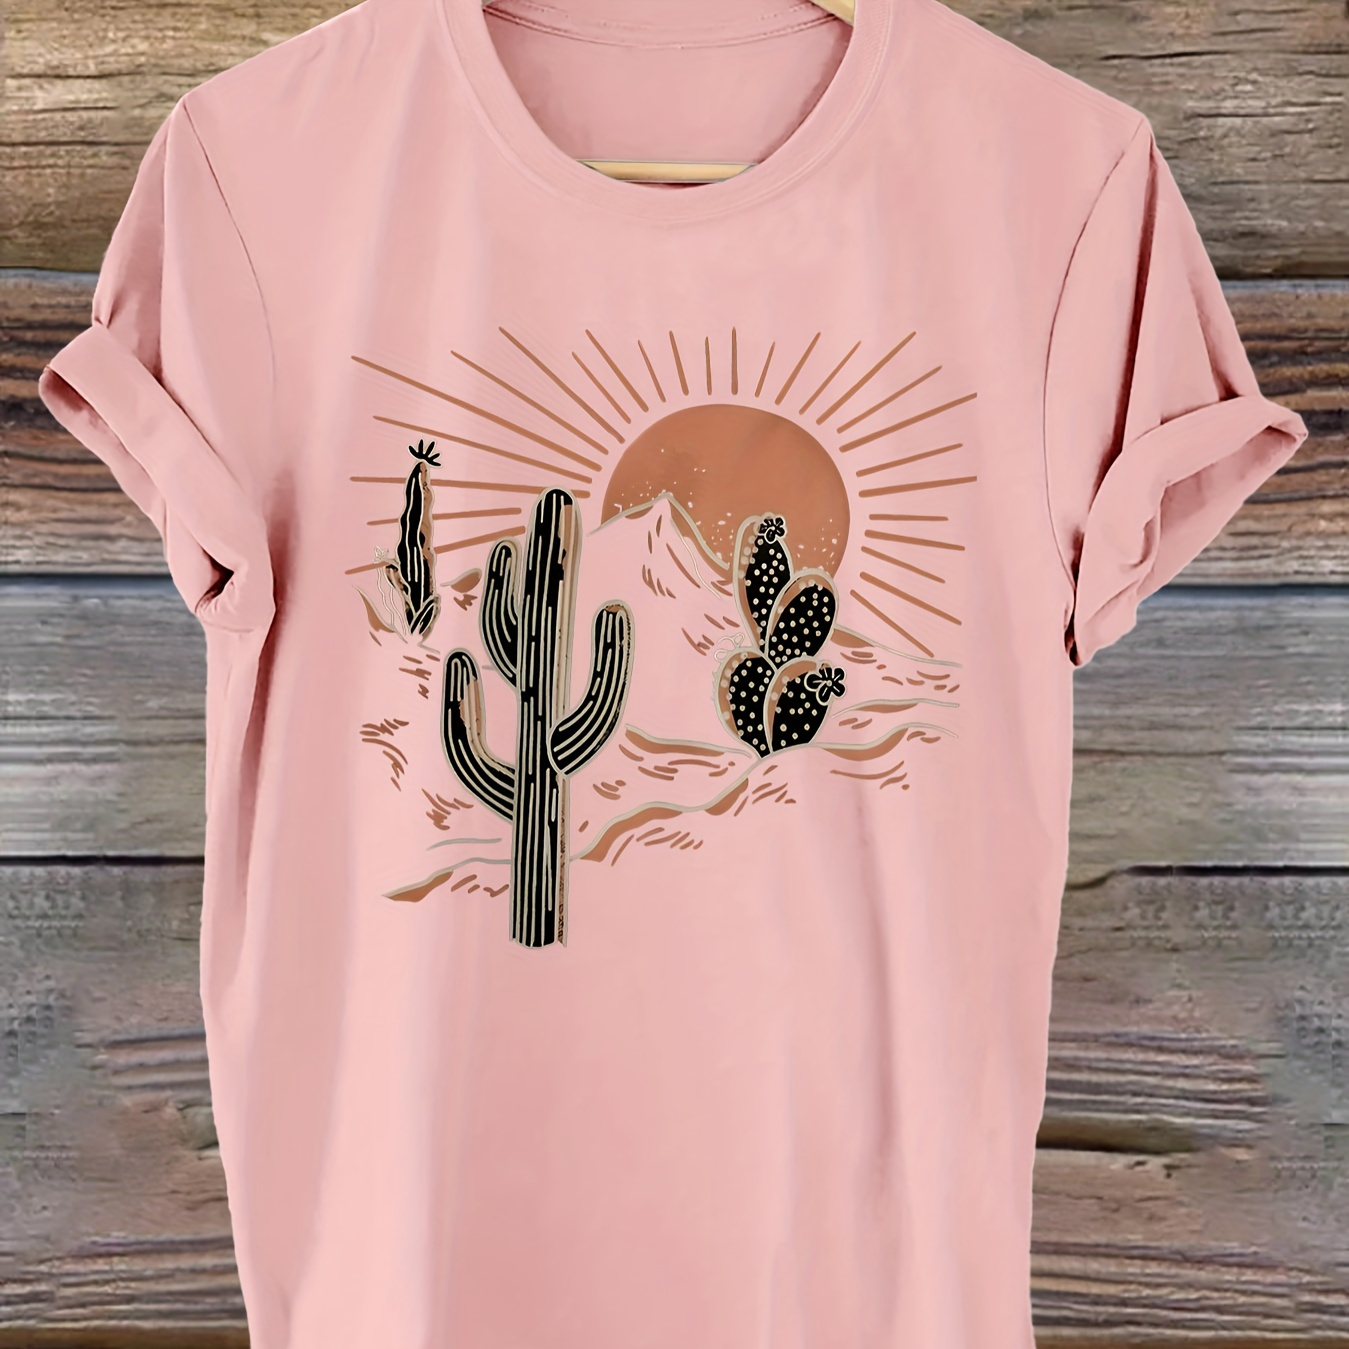 

Cactus Print T-shirt, Short Sleeve Crew Neck Casual Top For Summer & Spring, Women's Clothing